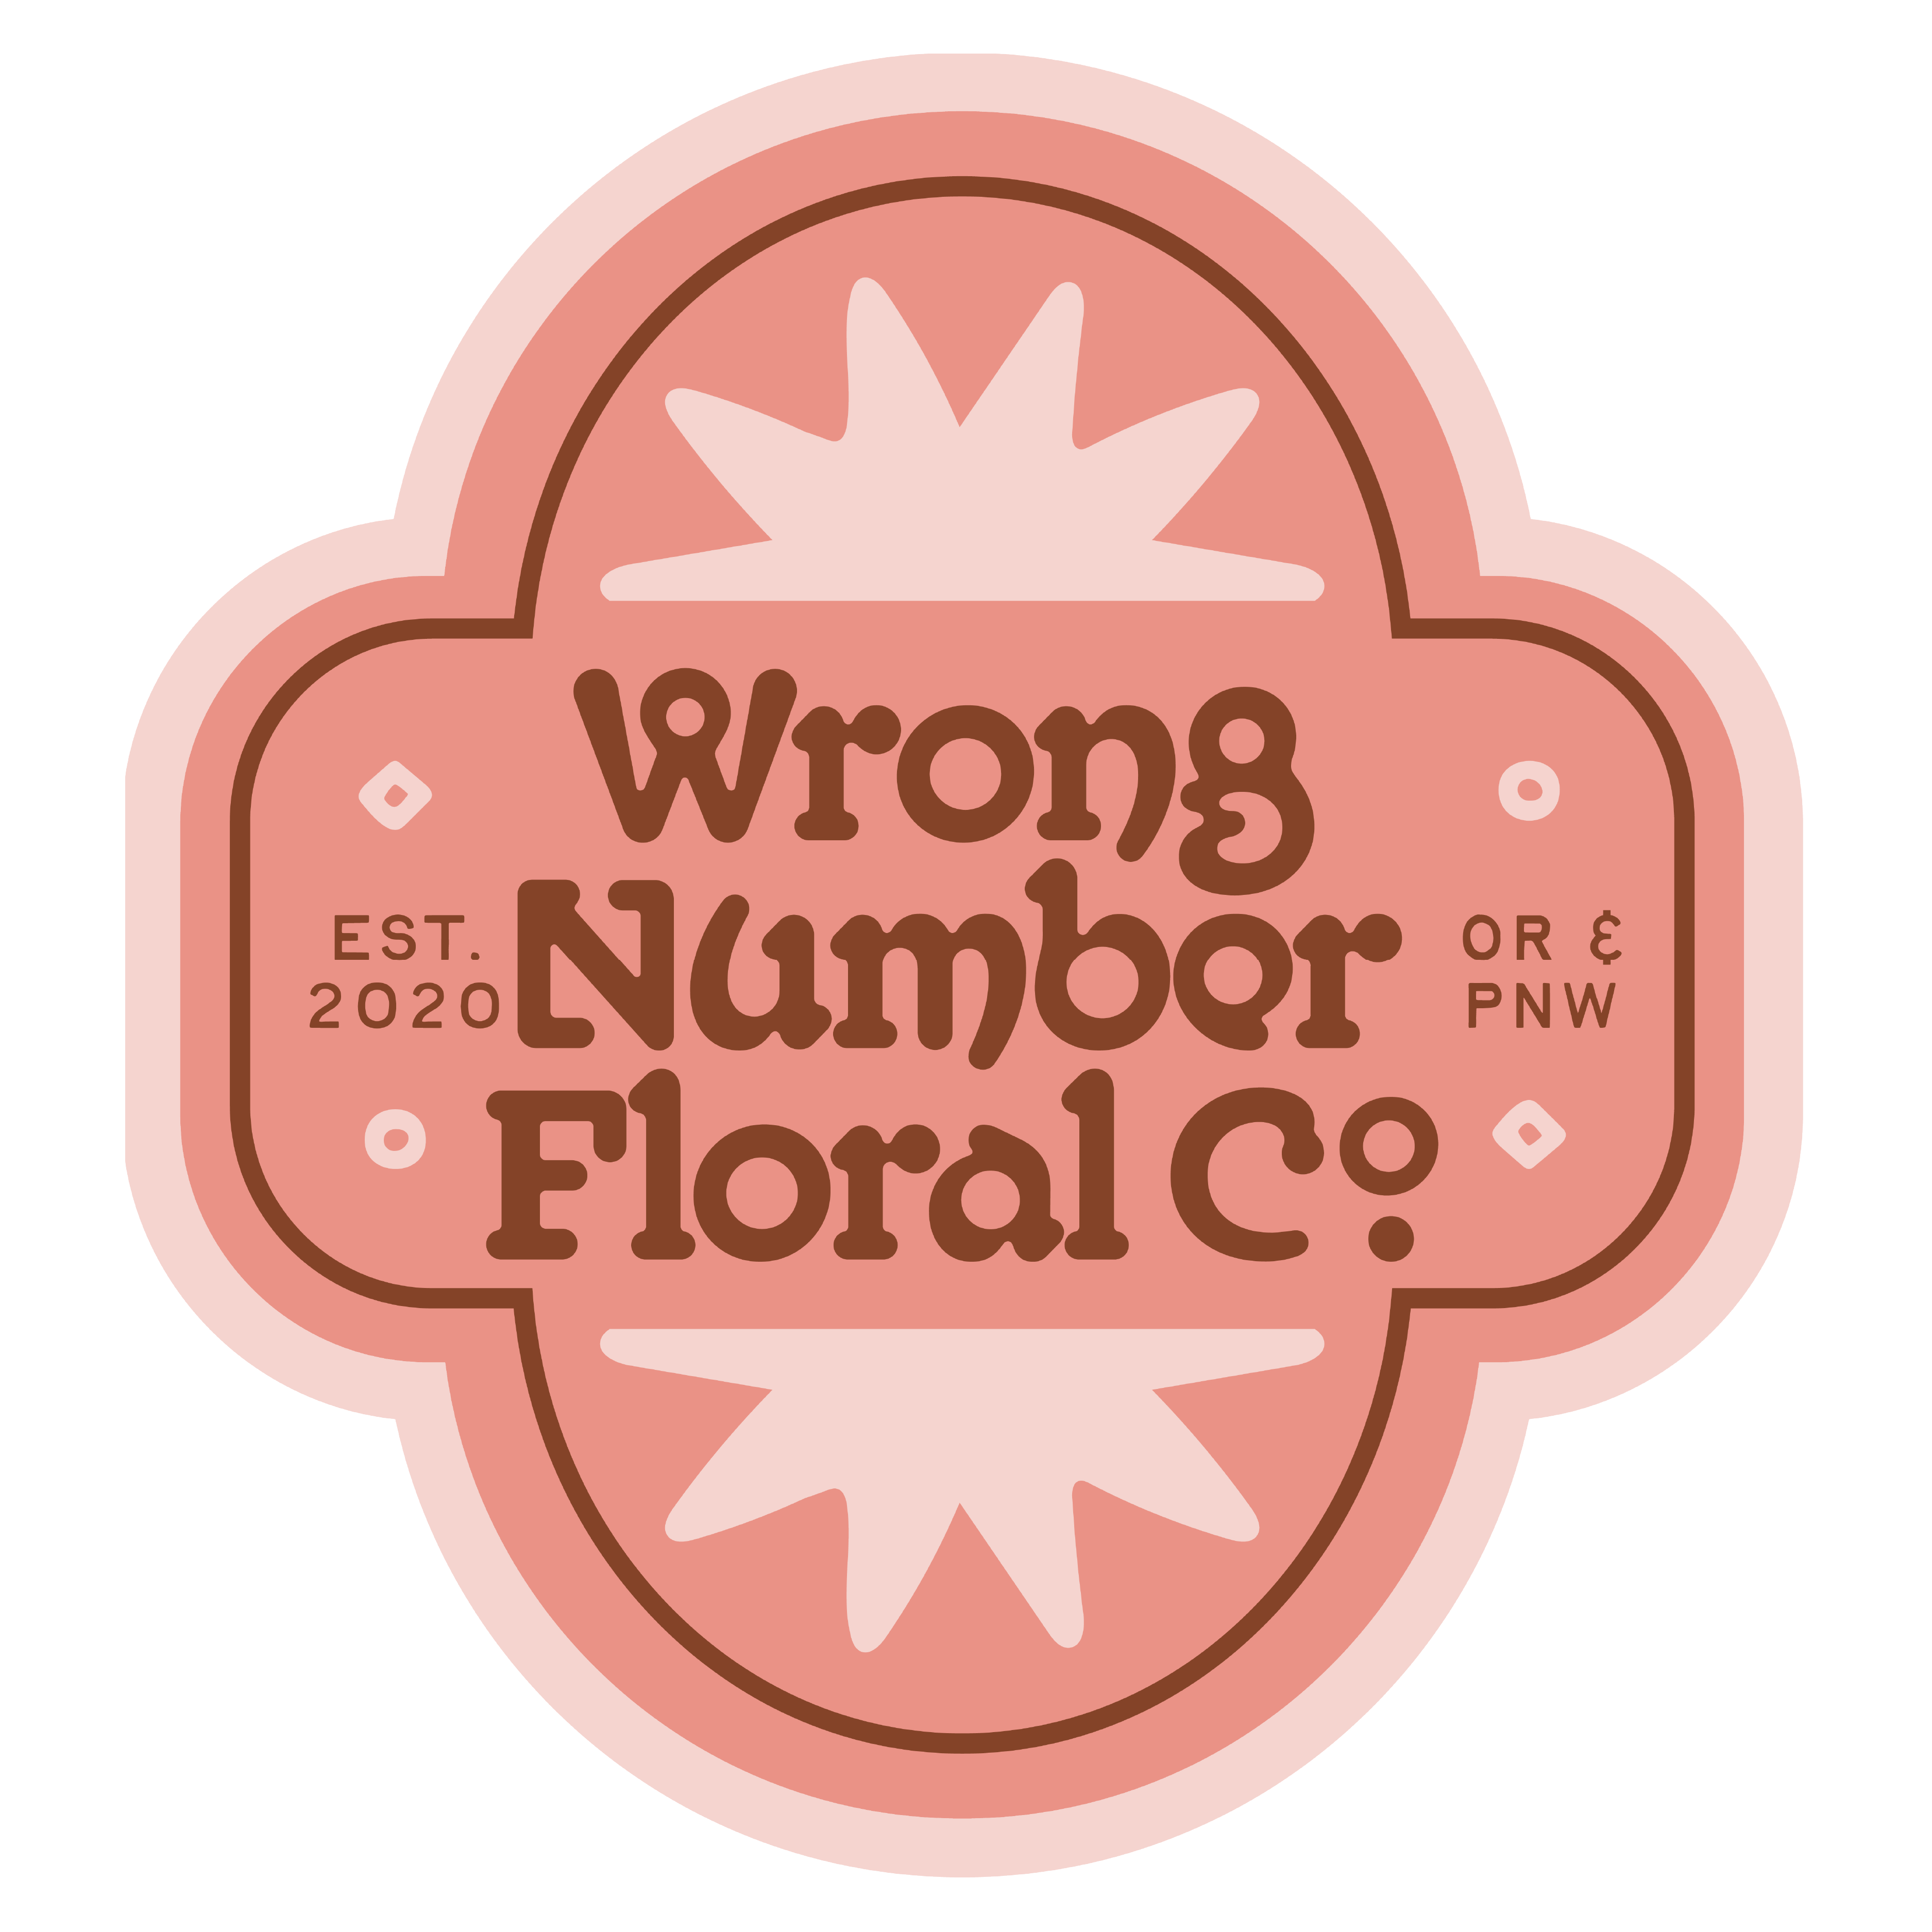 Wrong+Number+Floral+Mark logo design by logo designer ESM+Creative+Studio+ for your inspiration and for the worlds largest logo competition